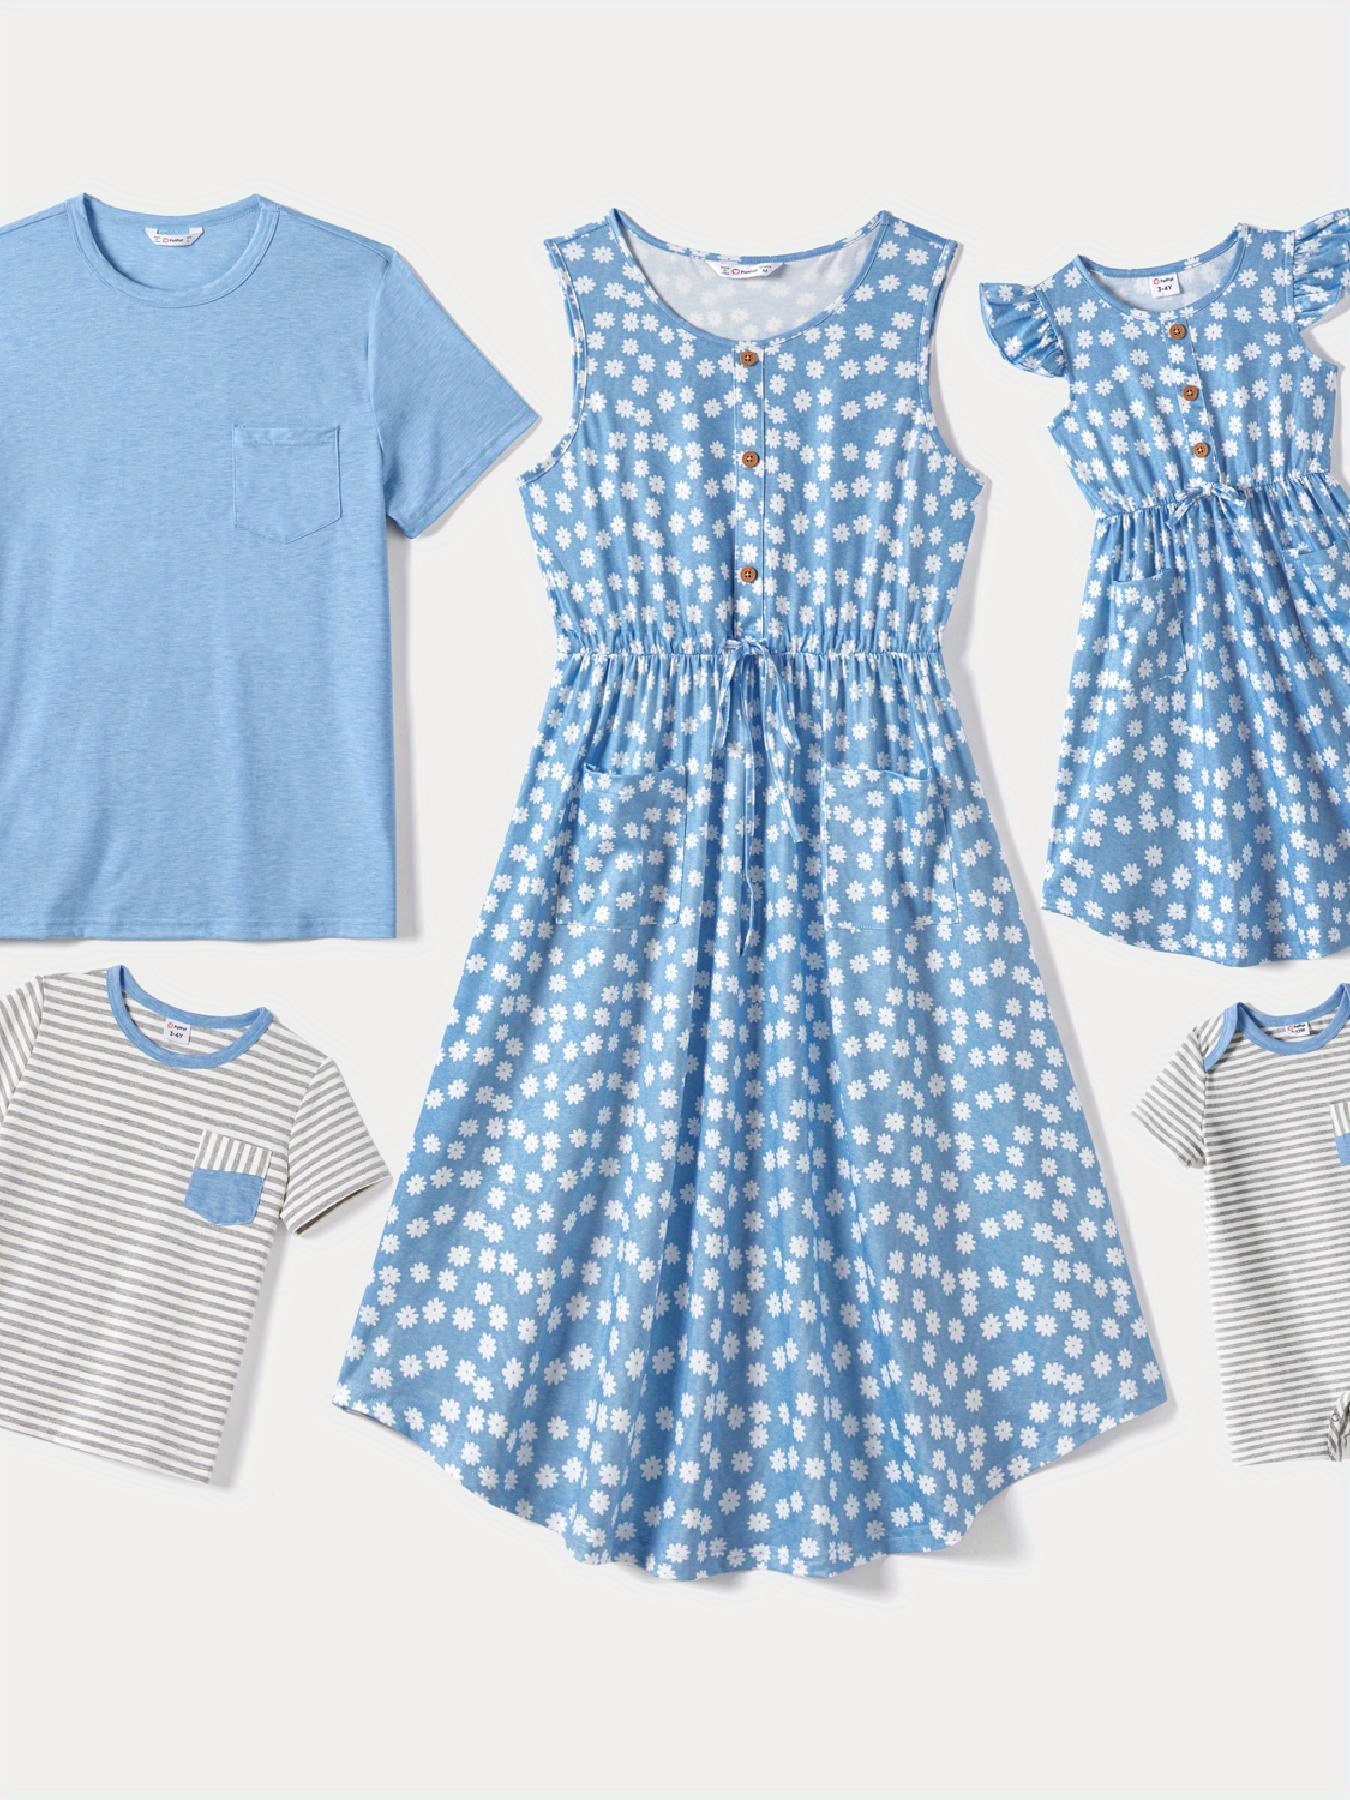 patpat family matching allover daisy print curved hem drawstring tank dresses and short sleeve solid stripe t shirts sets